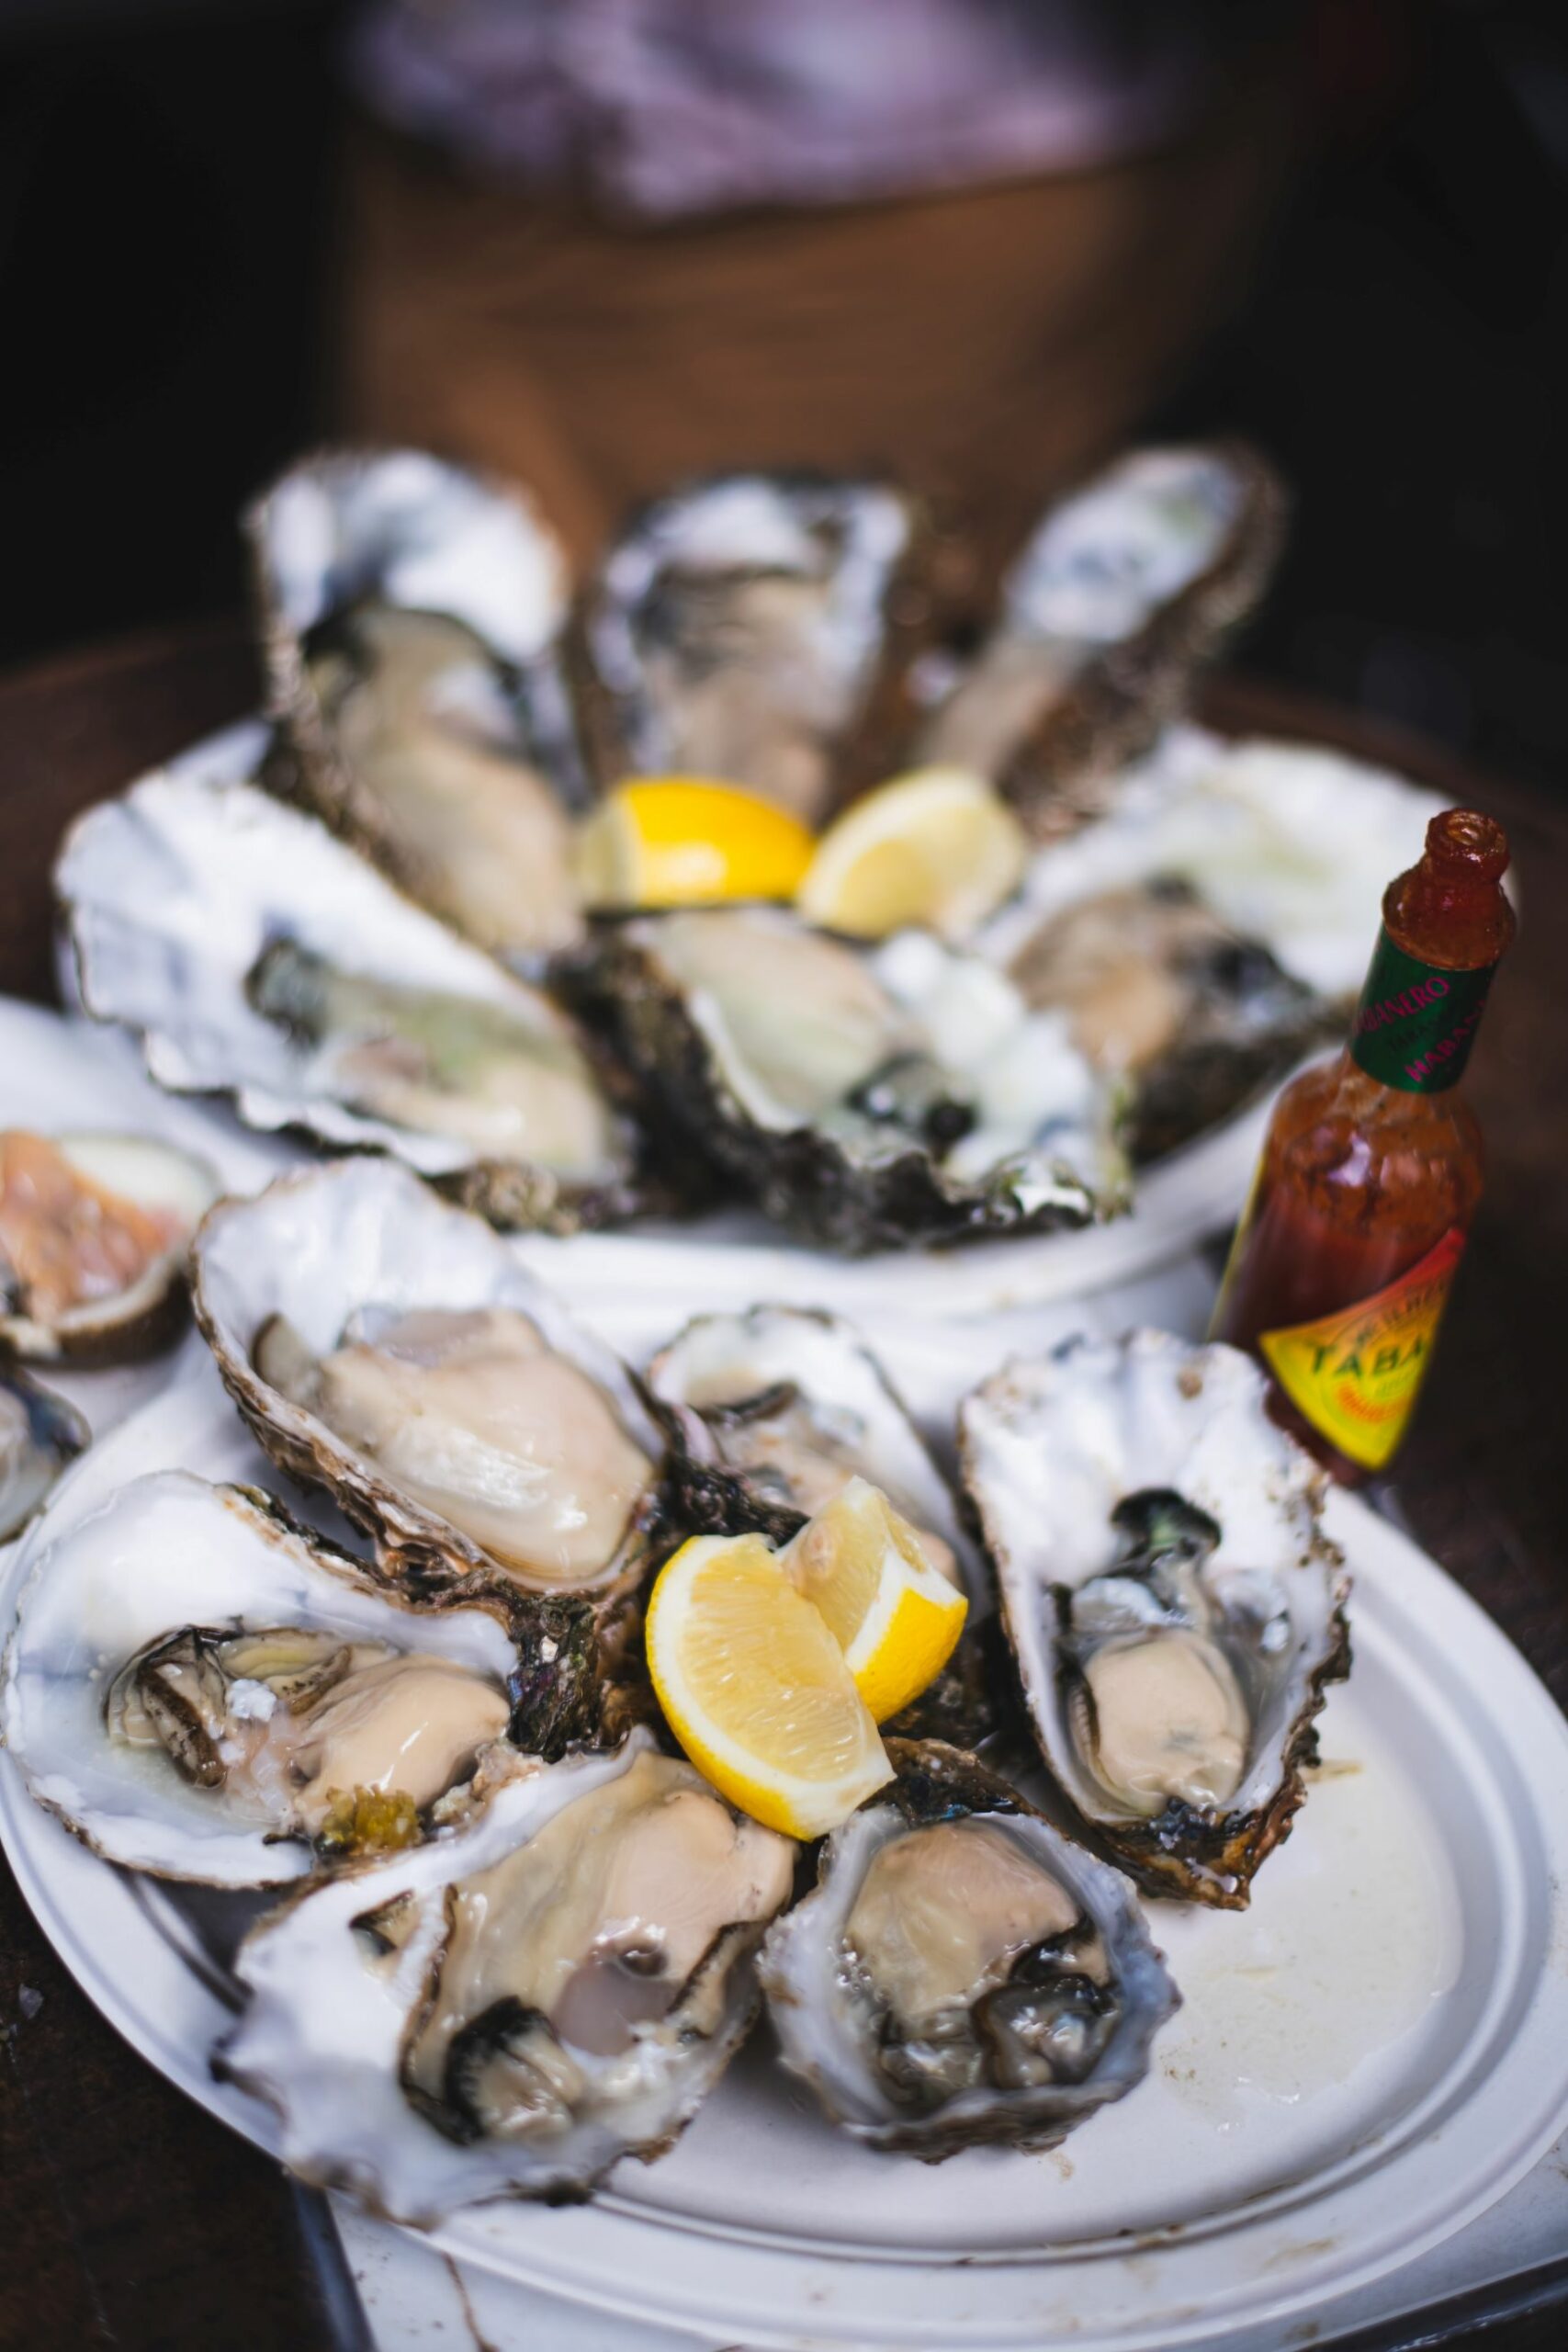 An image of oysters.